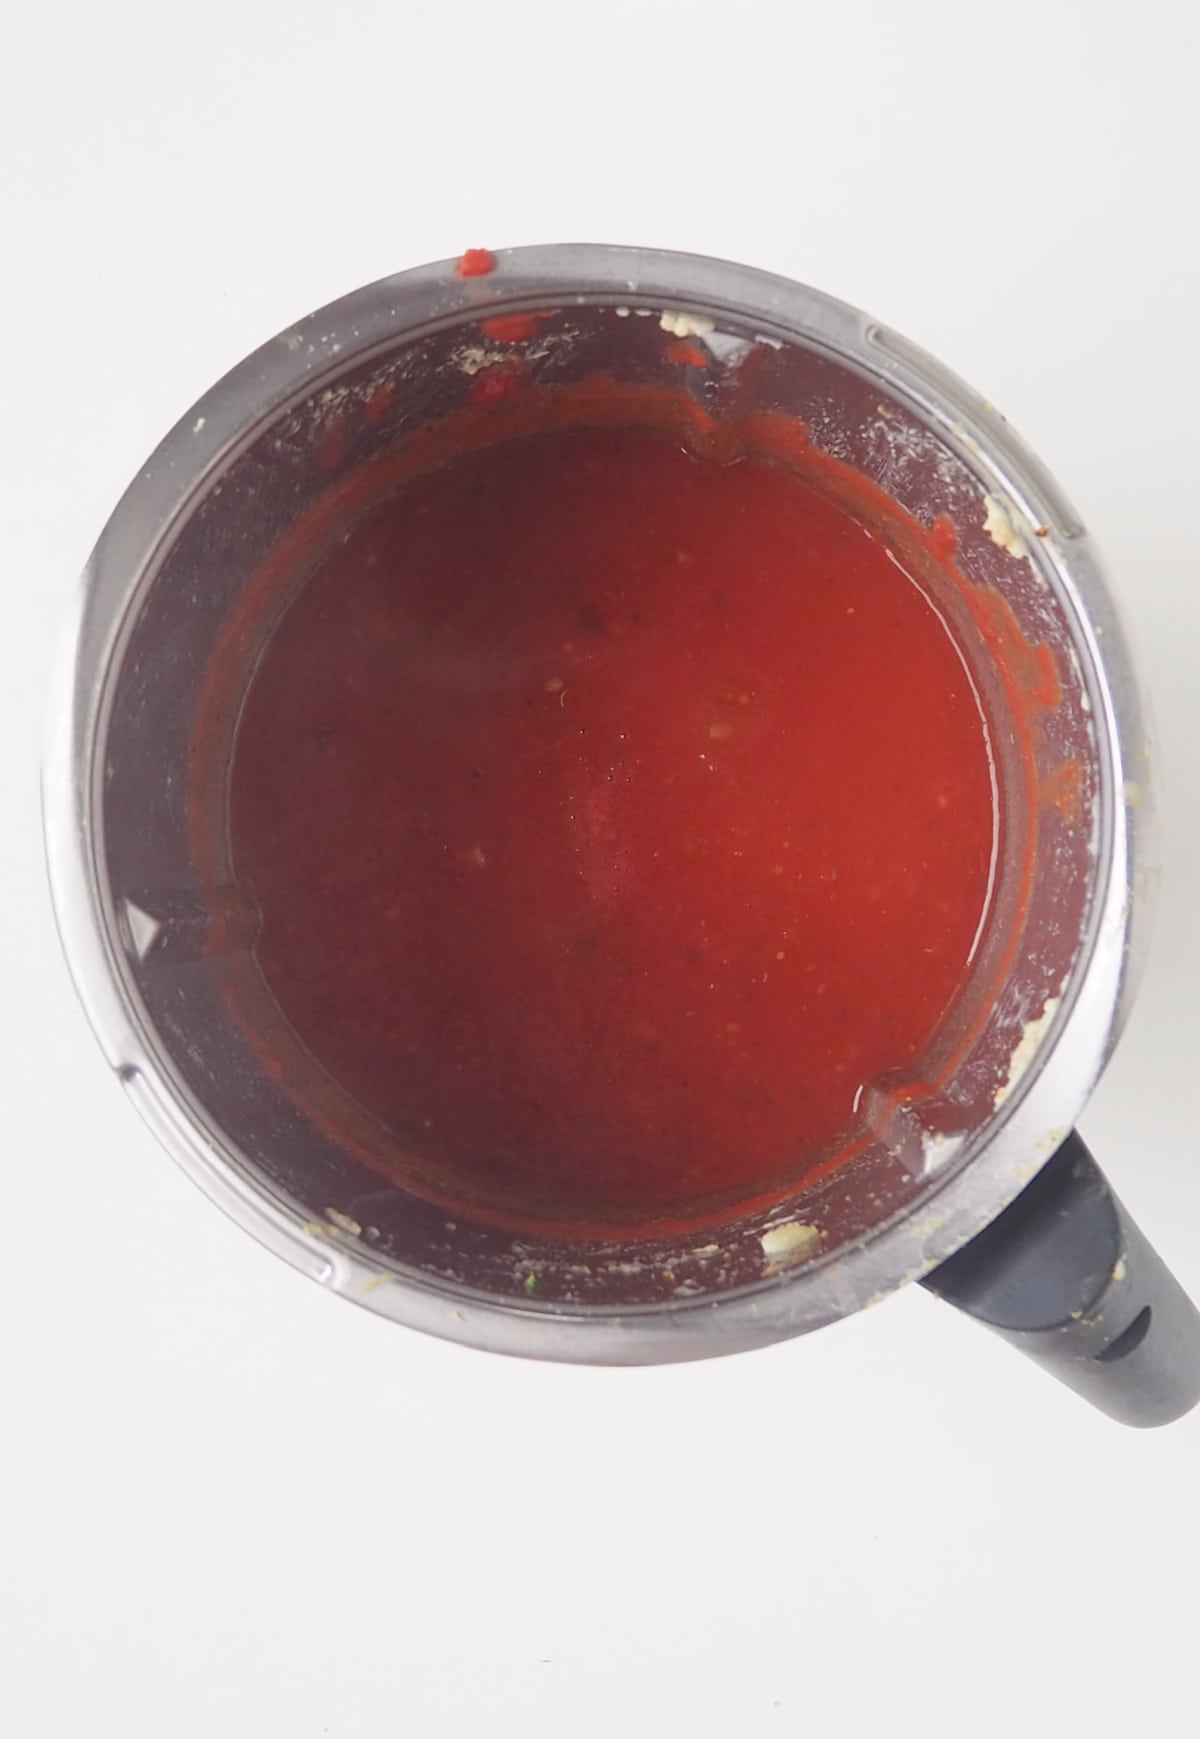 Sauce for Chicken Parma Balls in a Thermomix bowl.